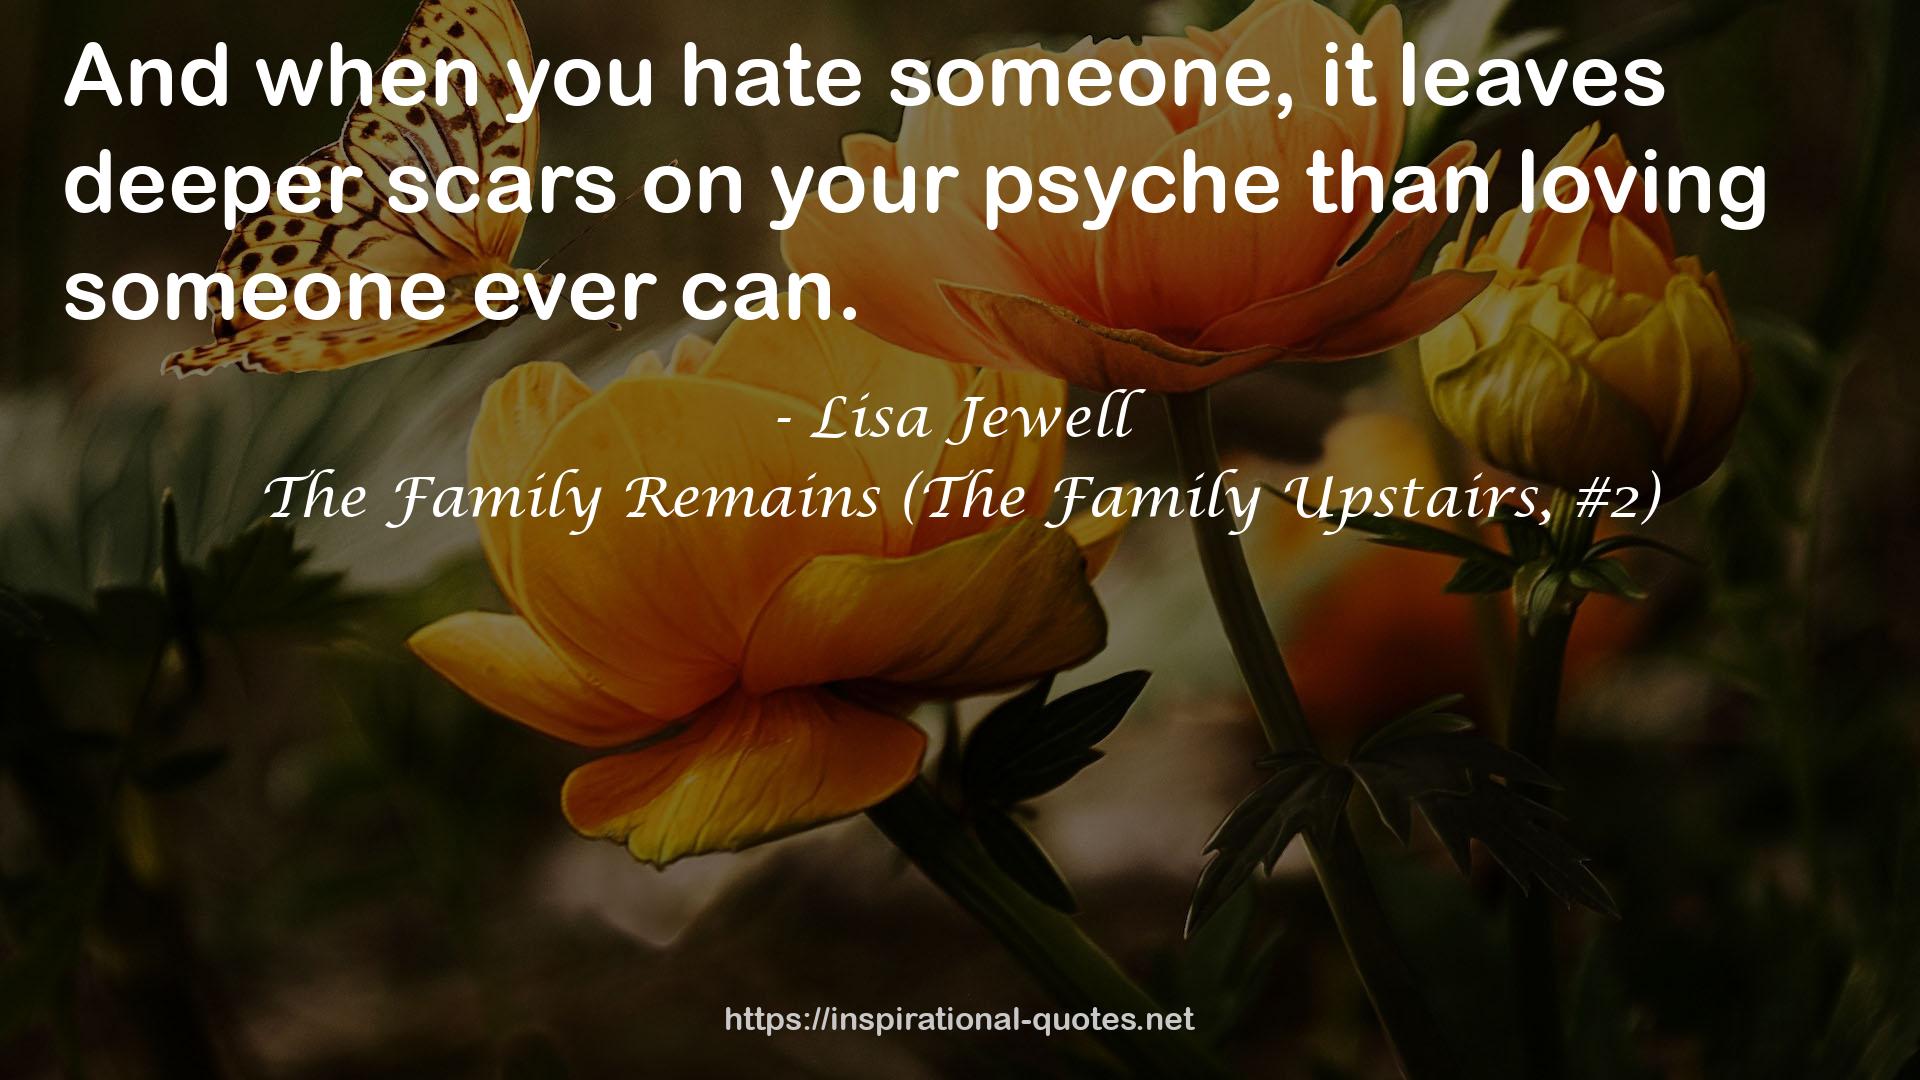 The Family Remains (The Family Upstairs, #2) QUOTES